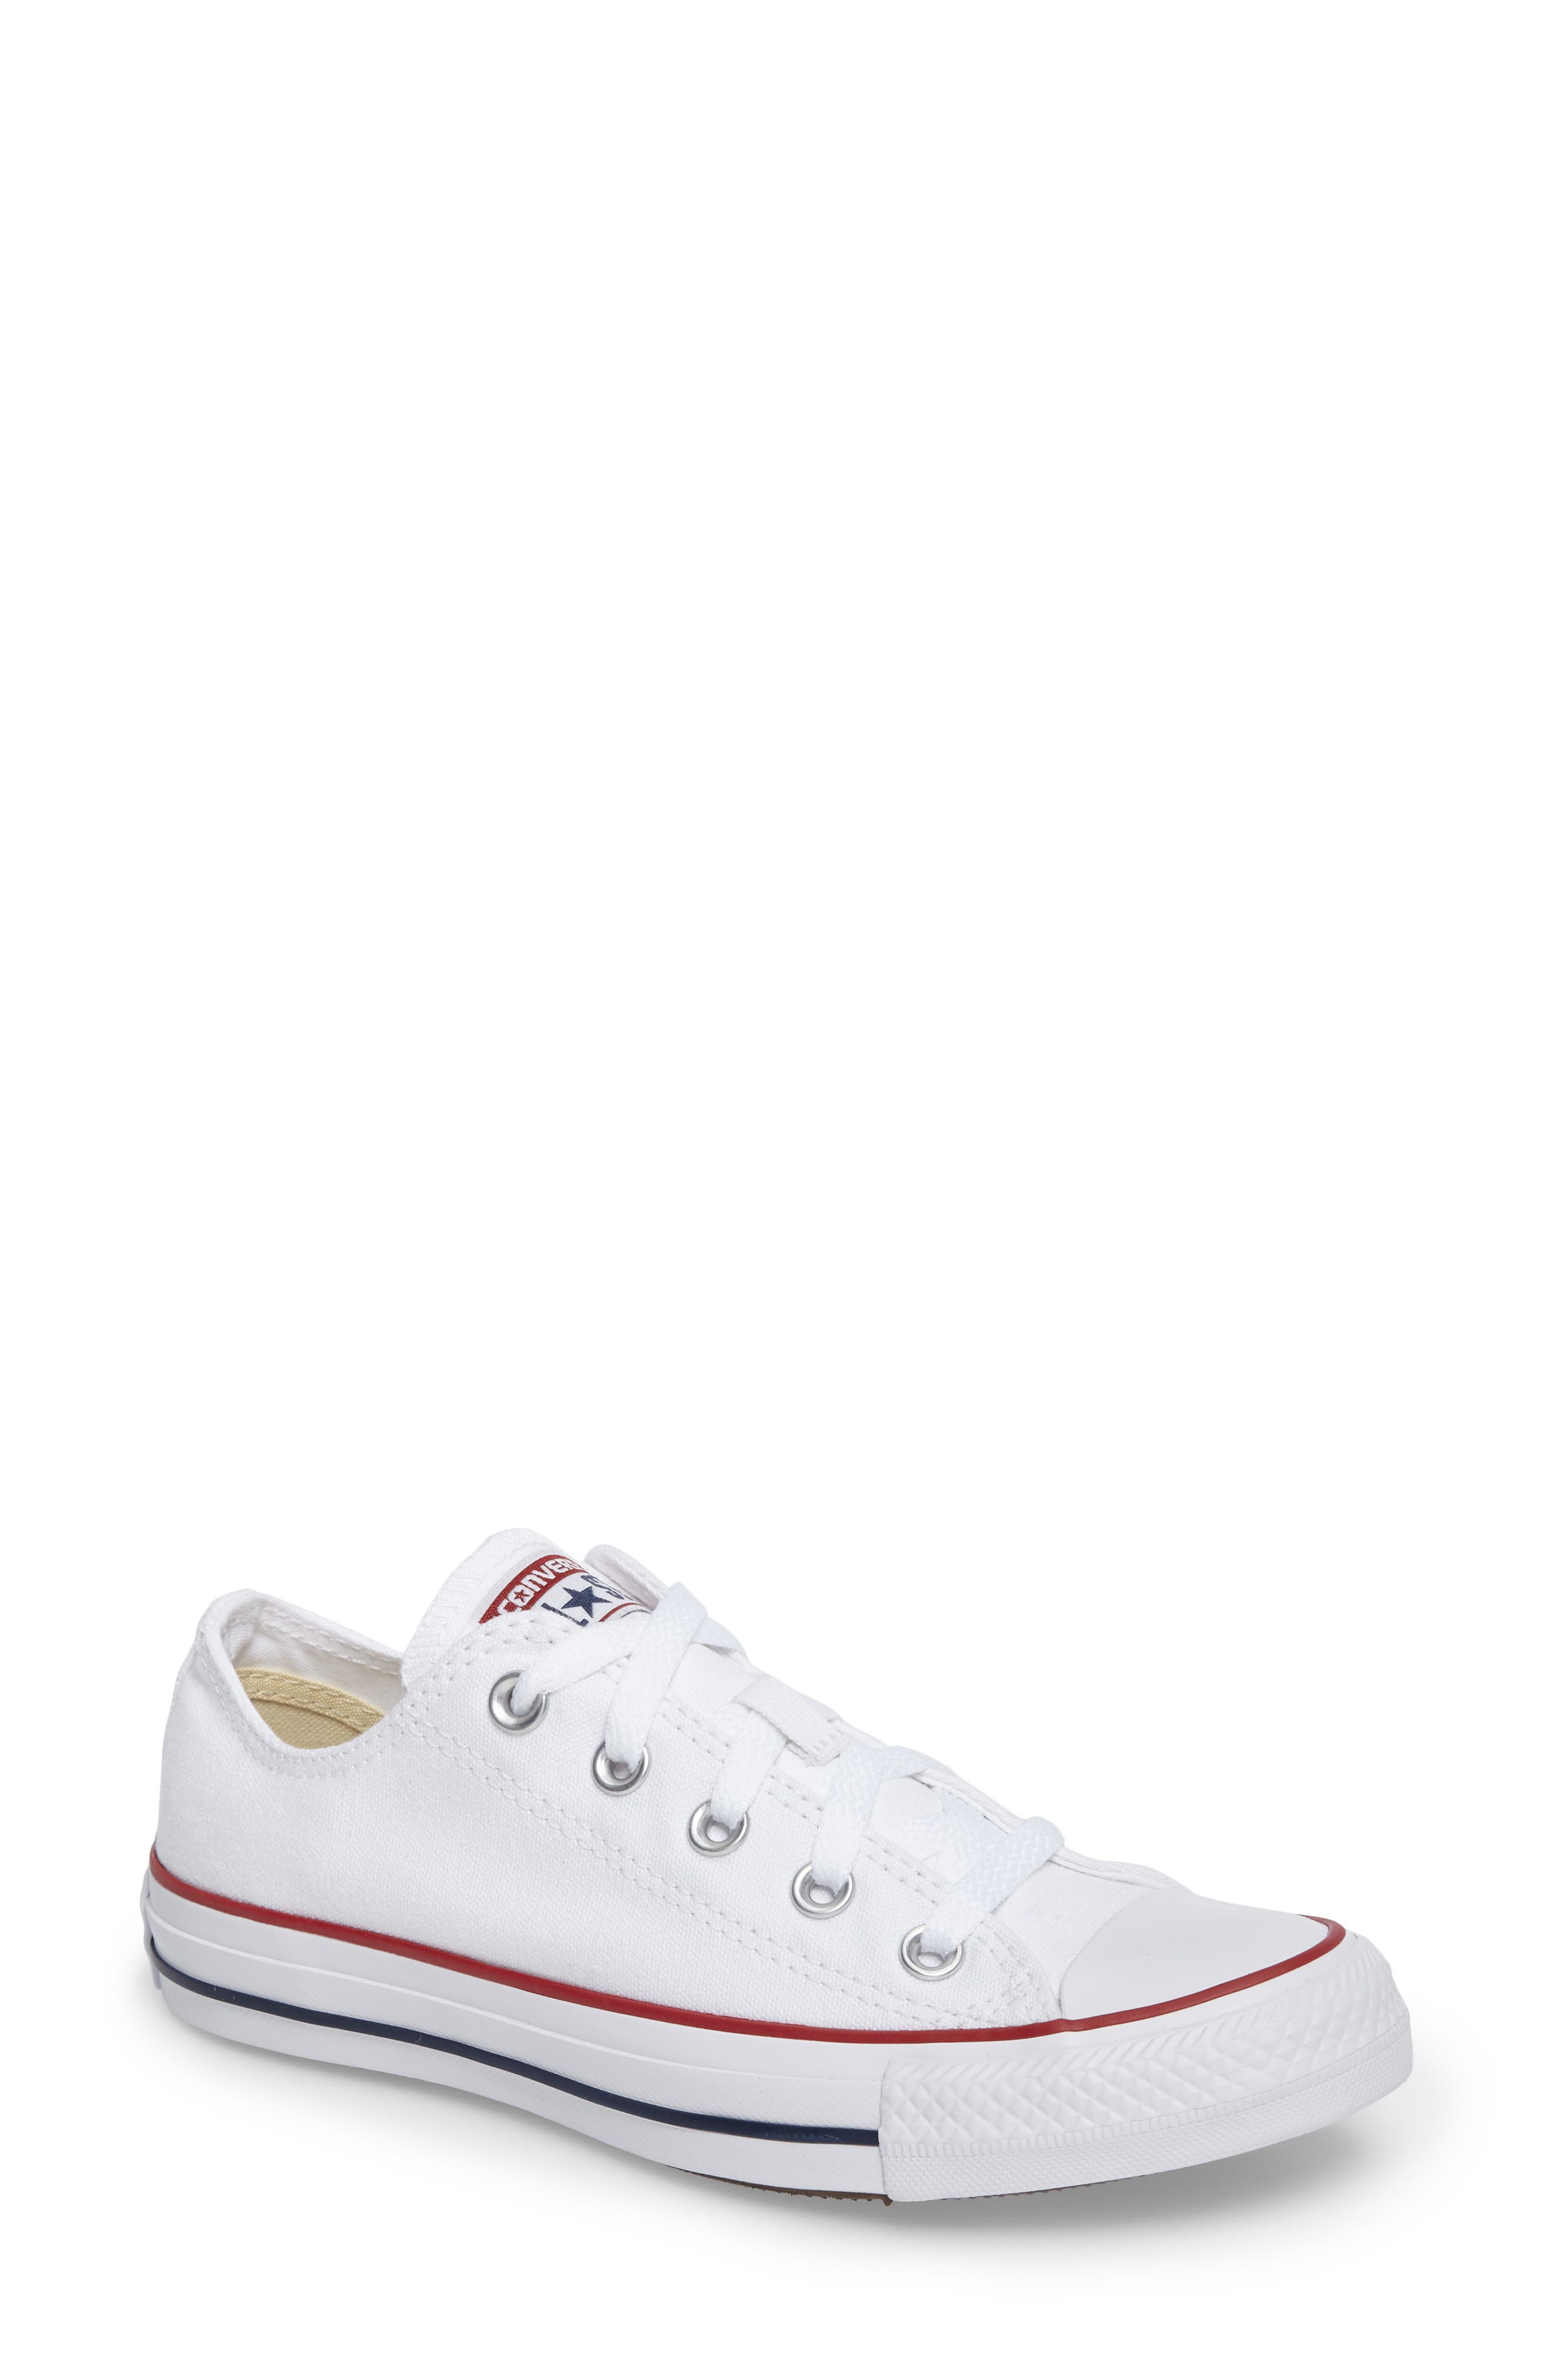 white converse low tops womens 